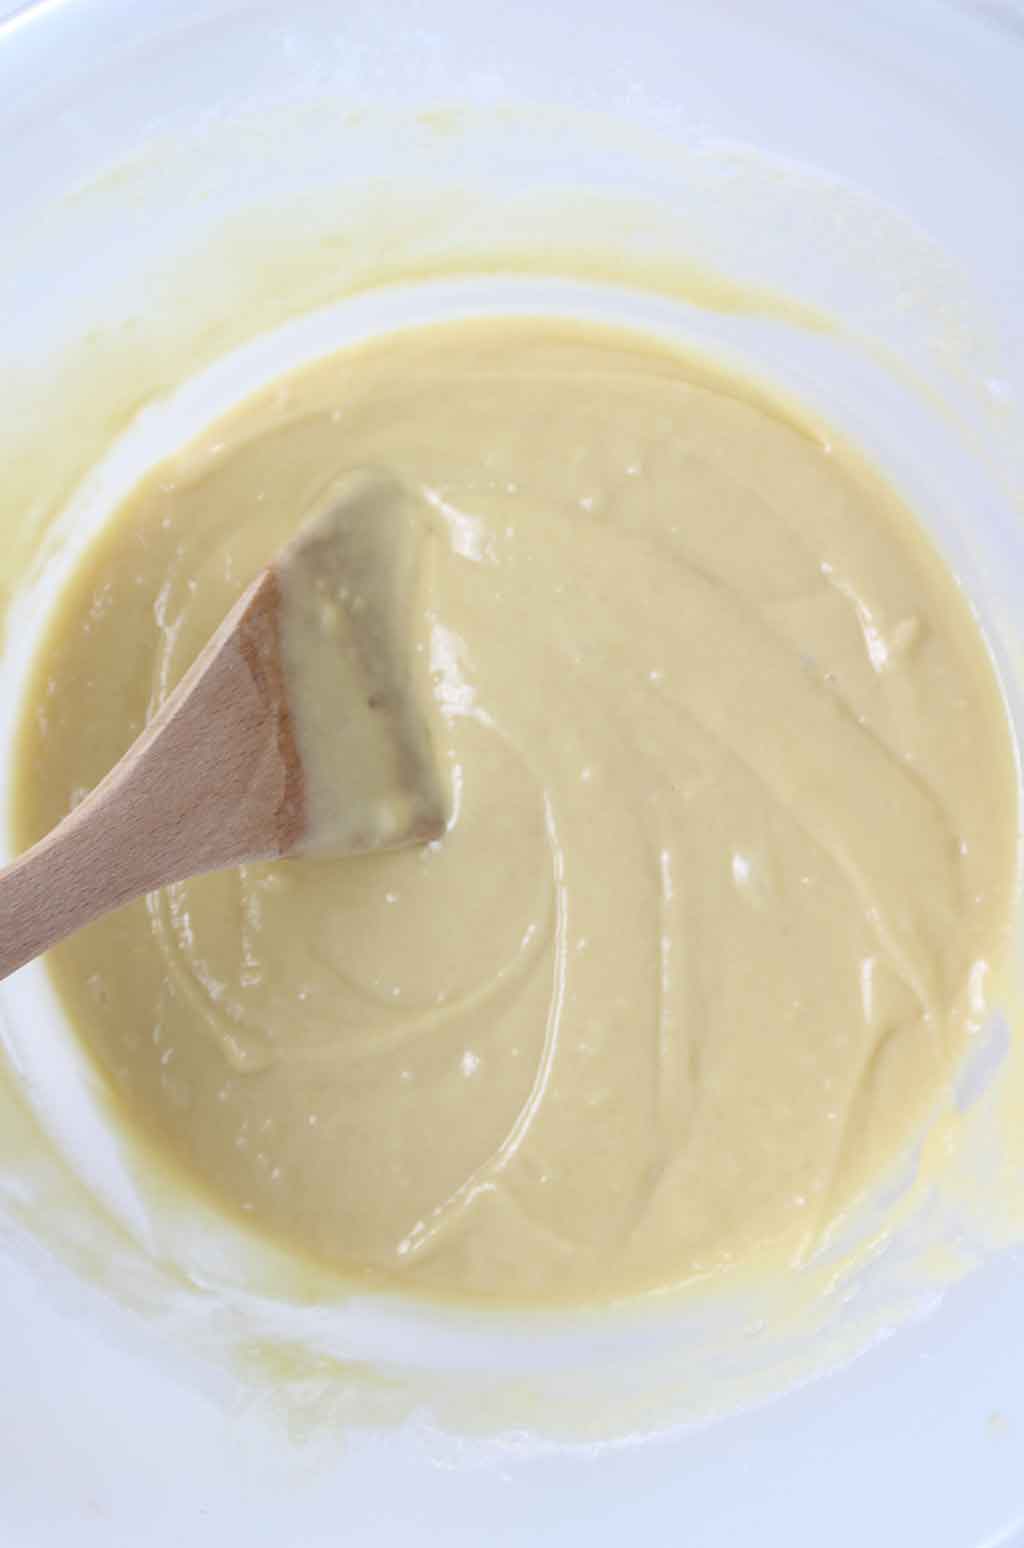 Cake Batter in the bowl